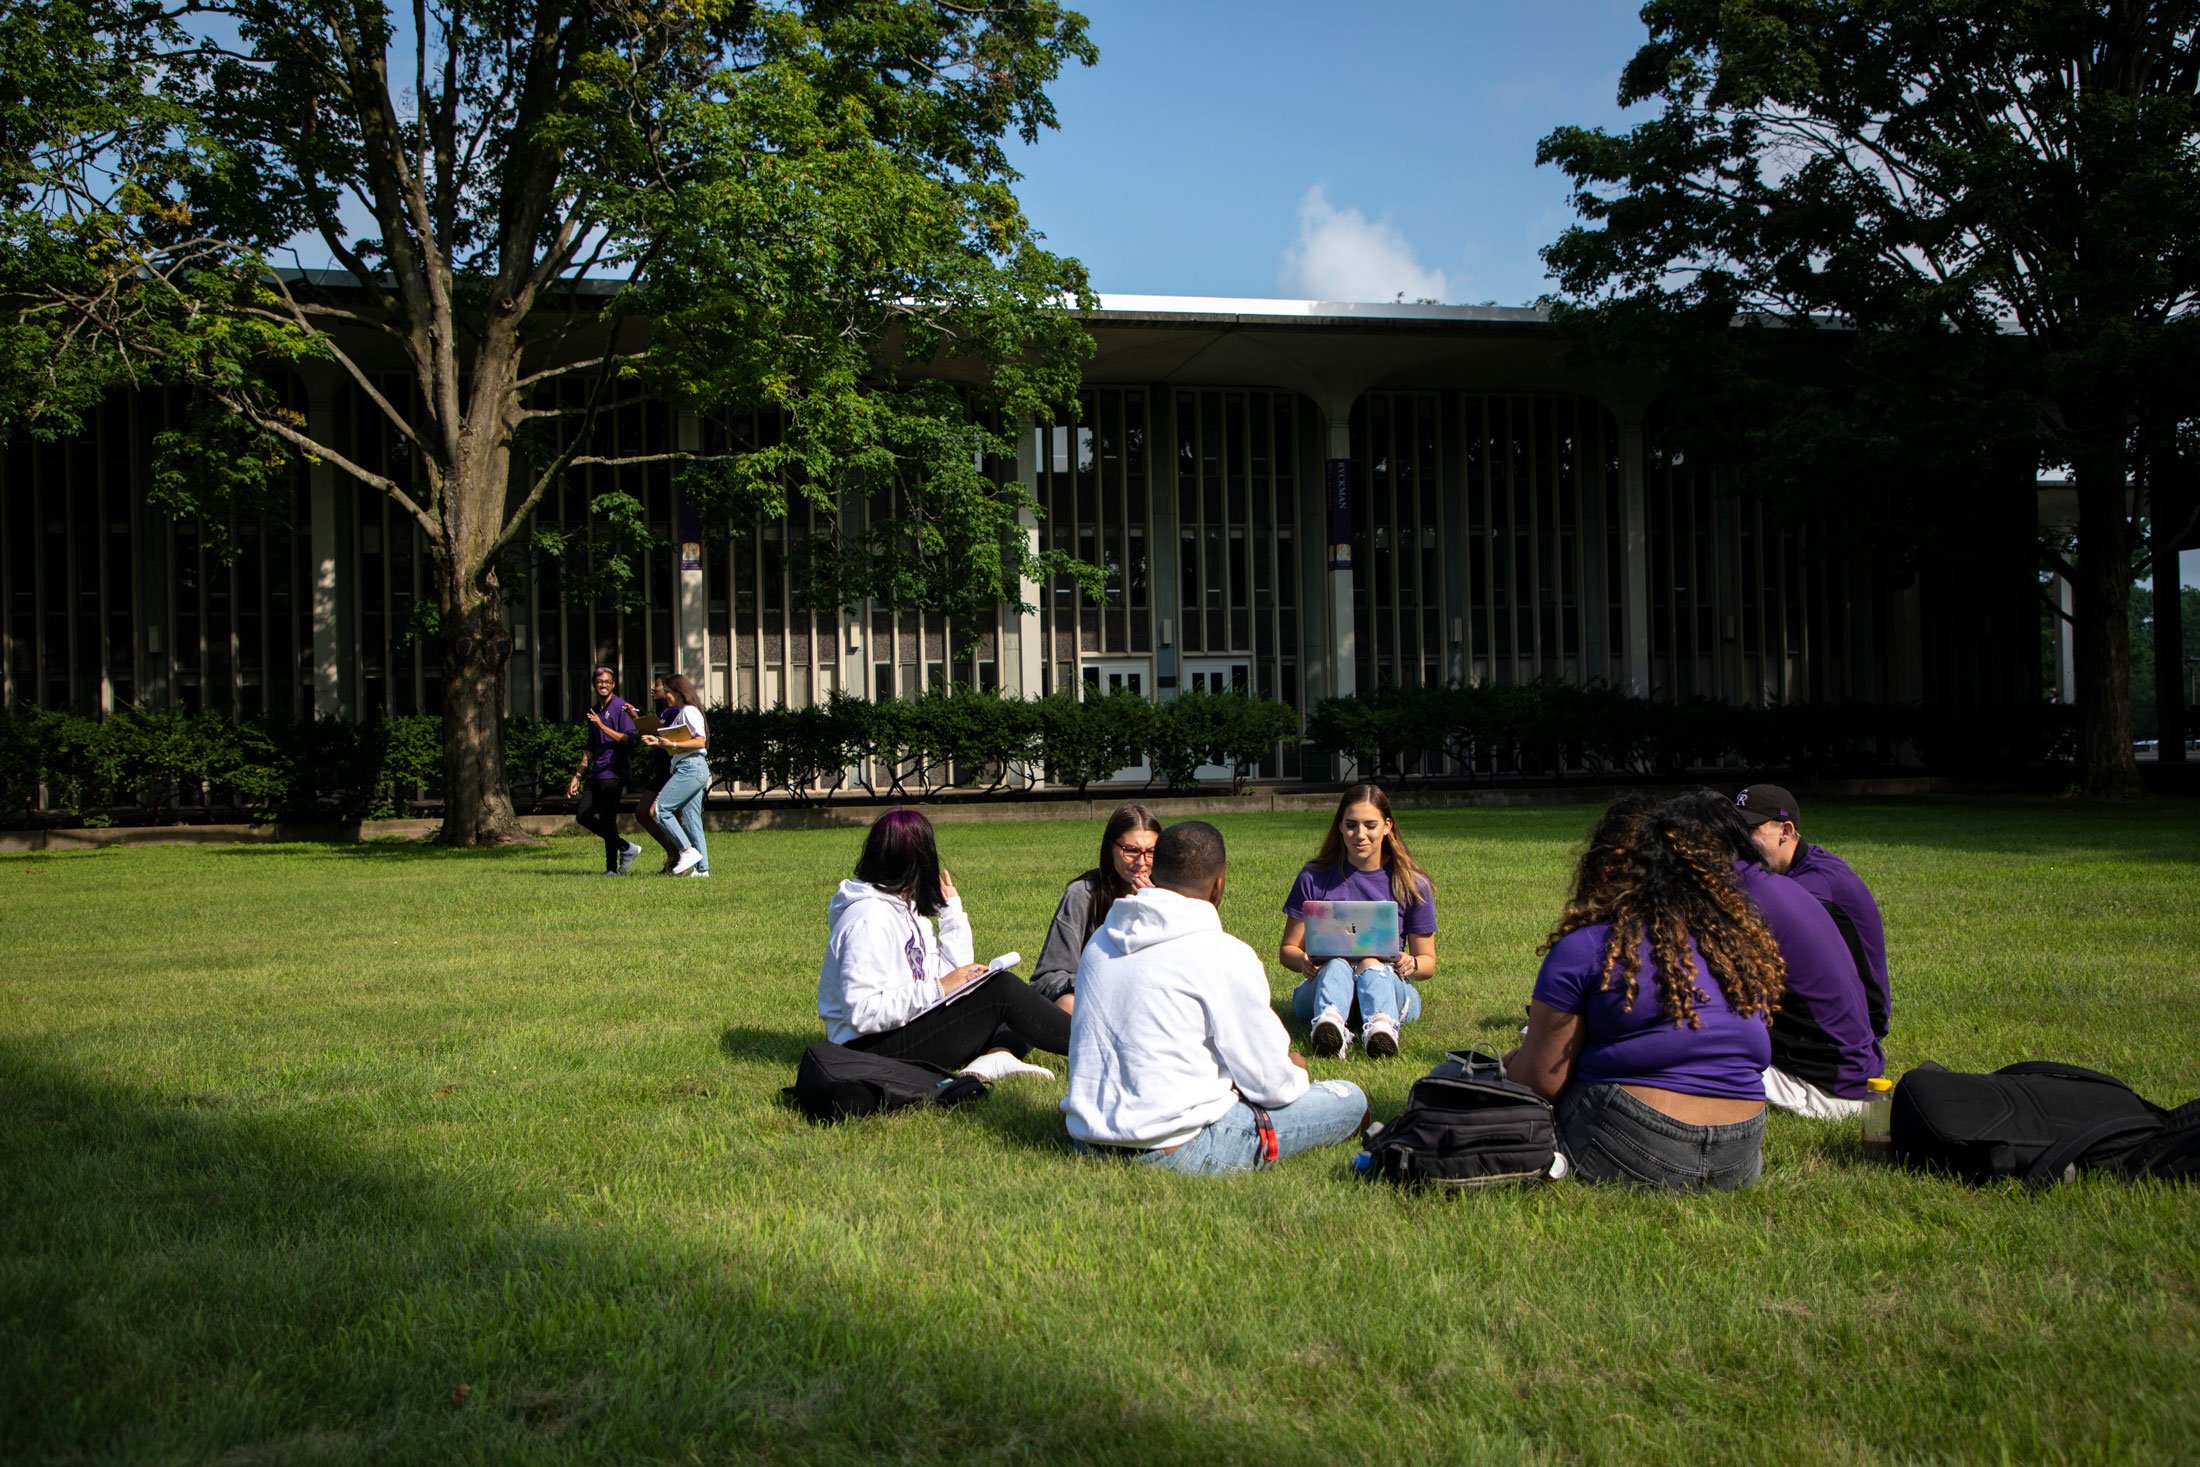 Seven students sit in a circle on the grass outside Dutch Quad, while two other students walk by on a sunny day